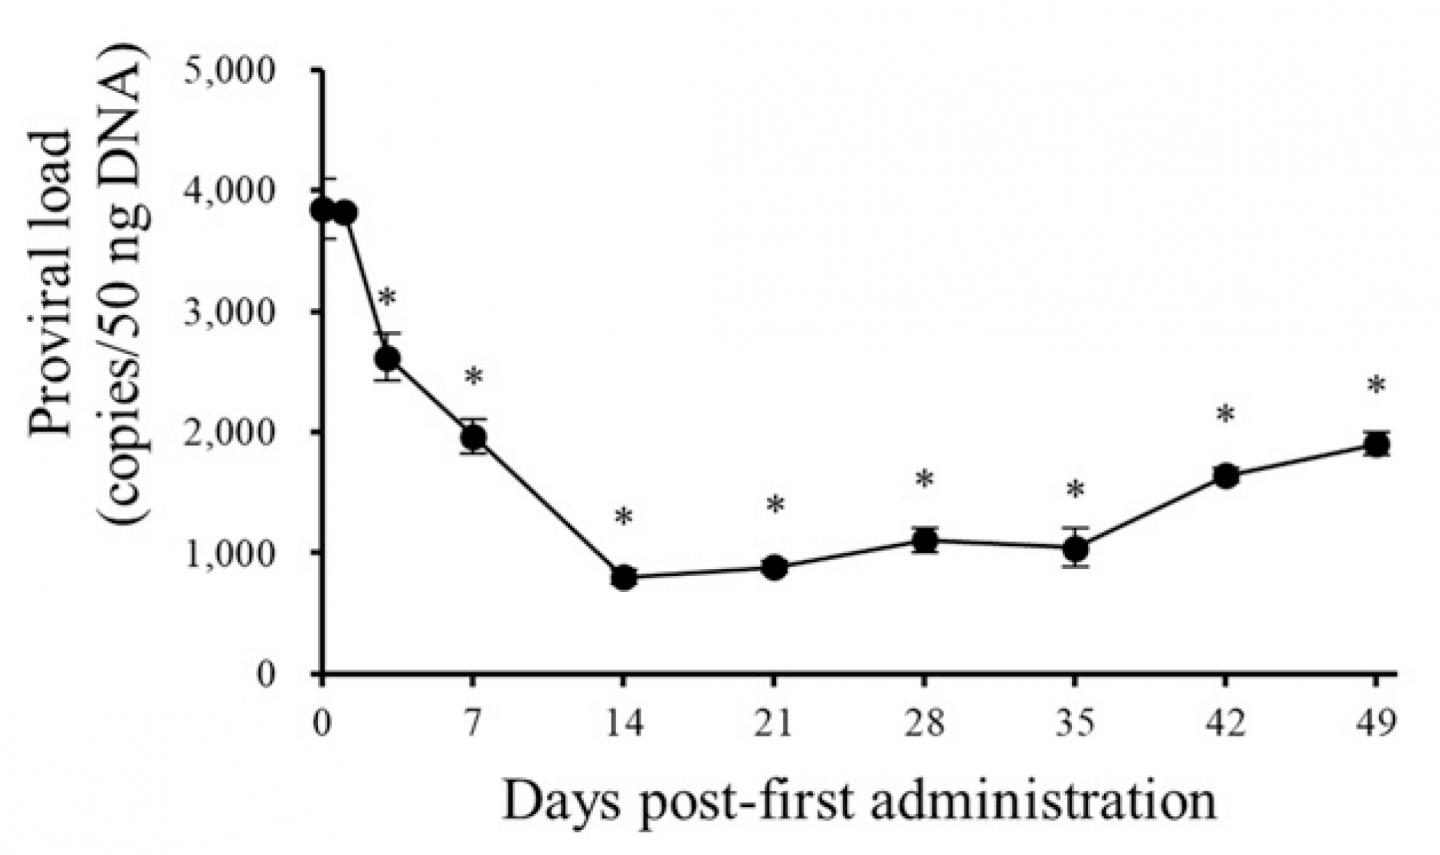 Proviral Load vs. Days Post-First Administration